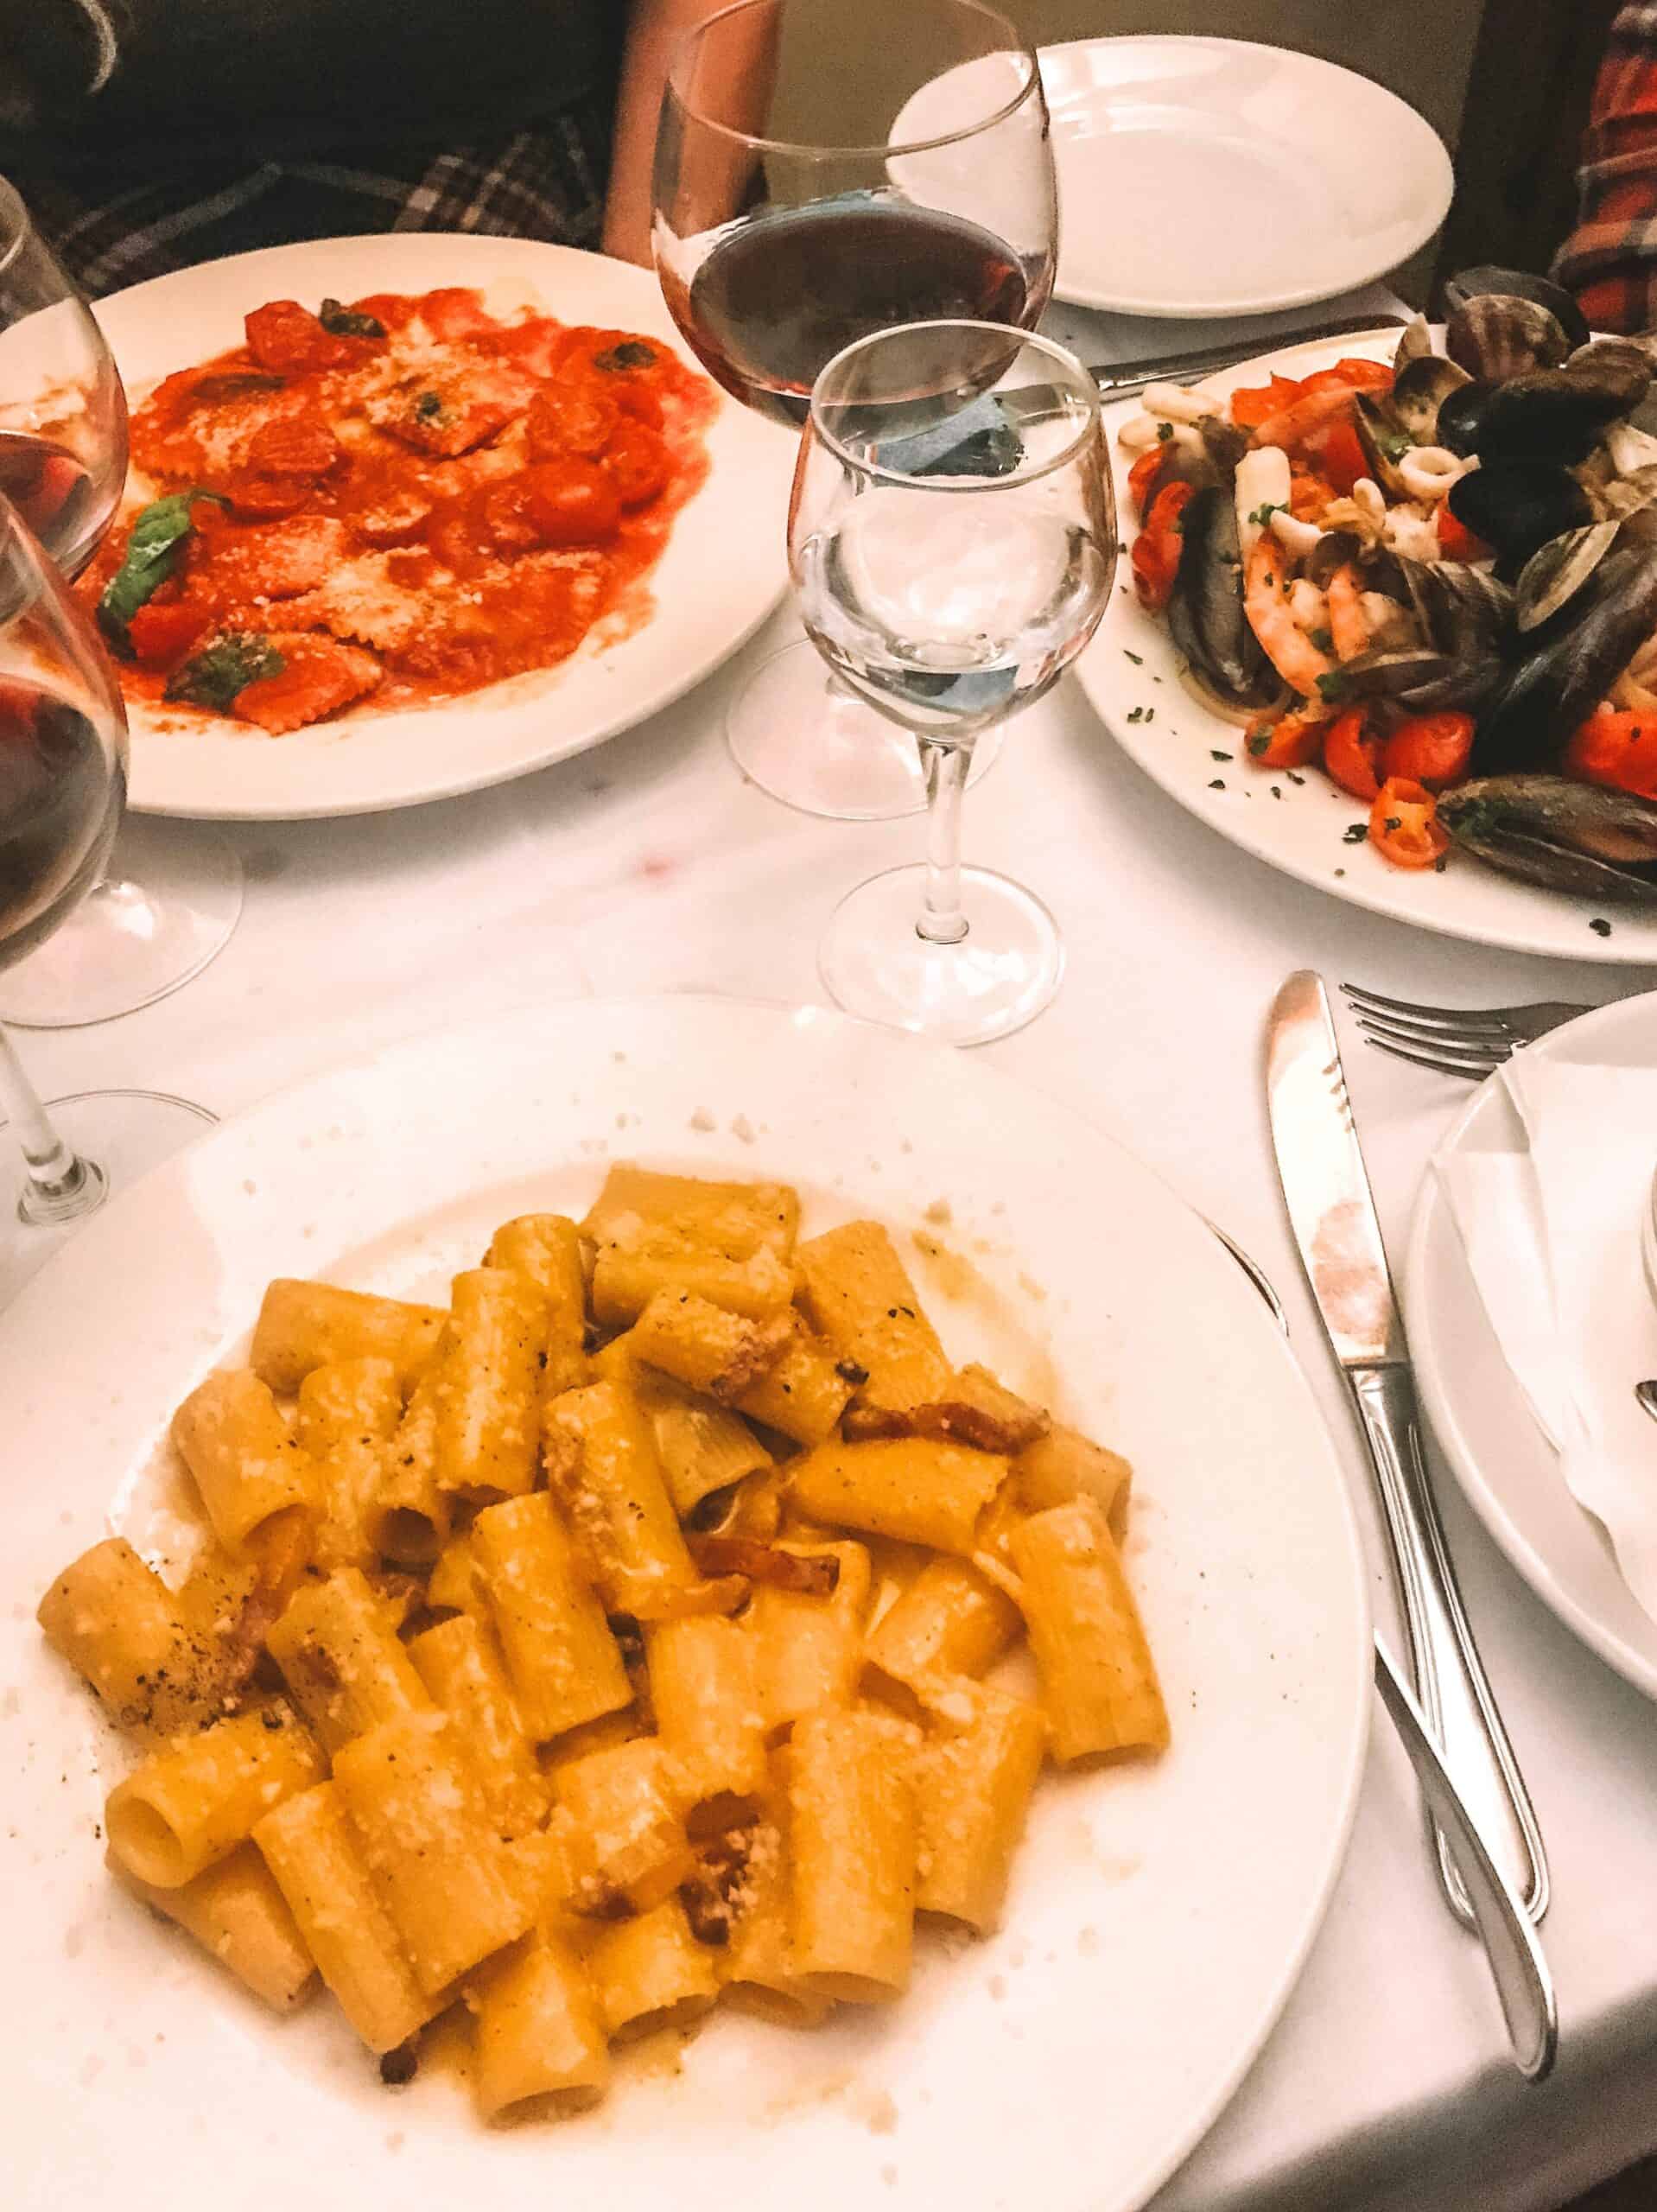 Carbonara, ravioli, and seafood spaghetti from Trattoria da Teo – one of the the best restaurants in Trastevere for fresh, authentic pasta.